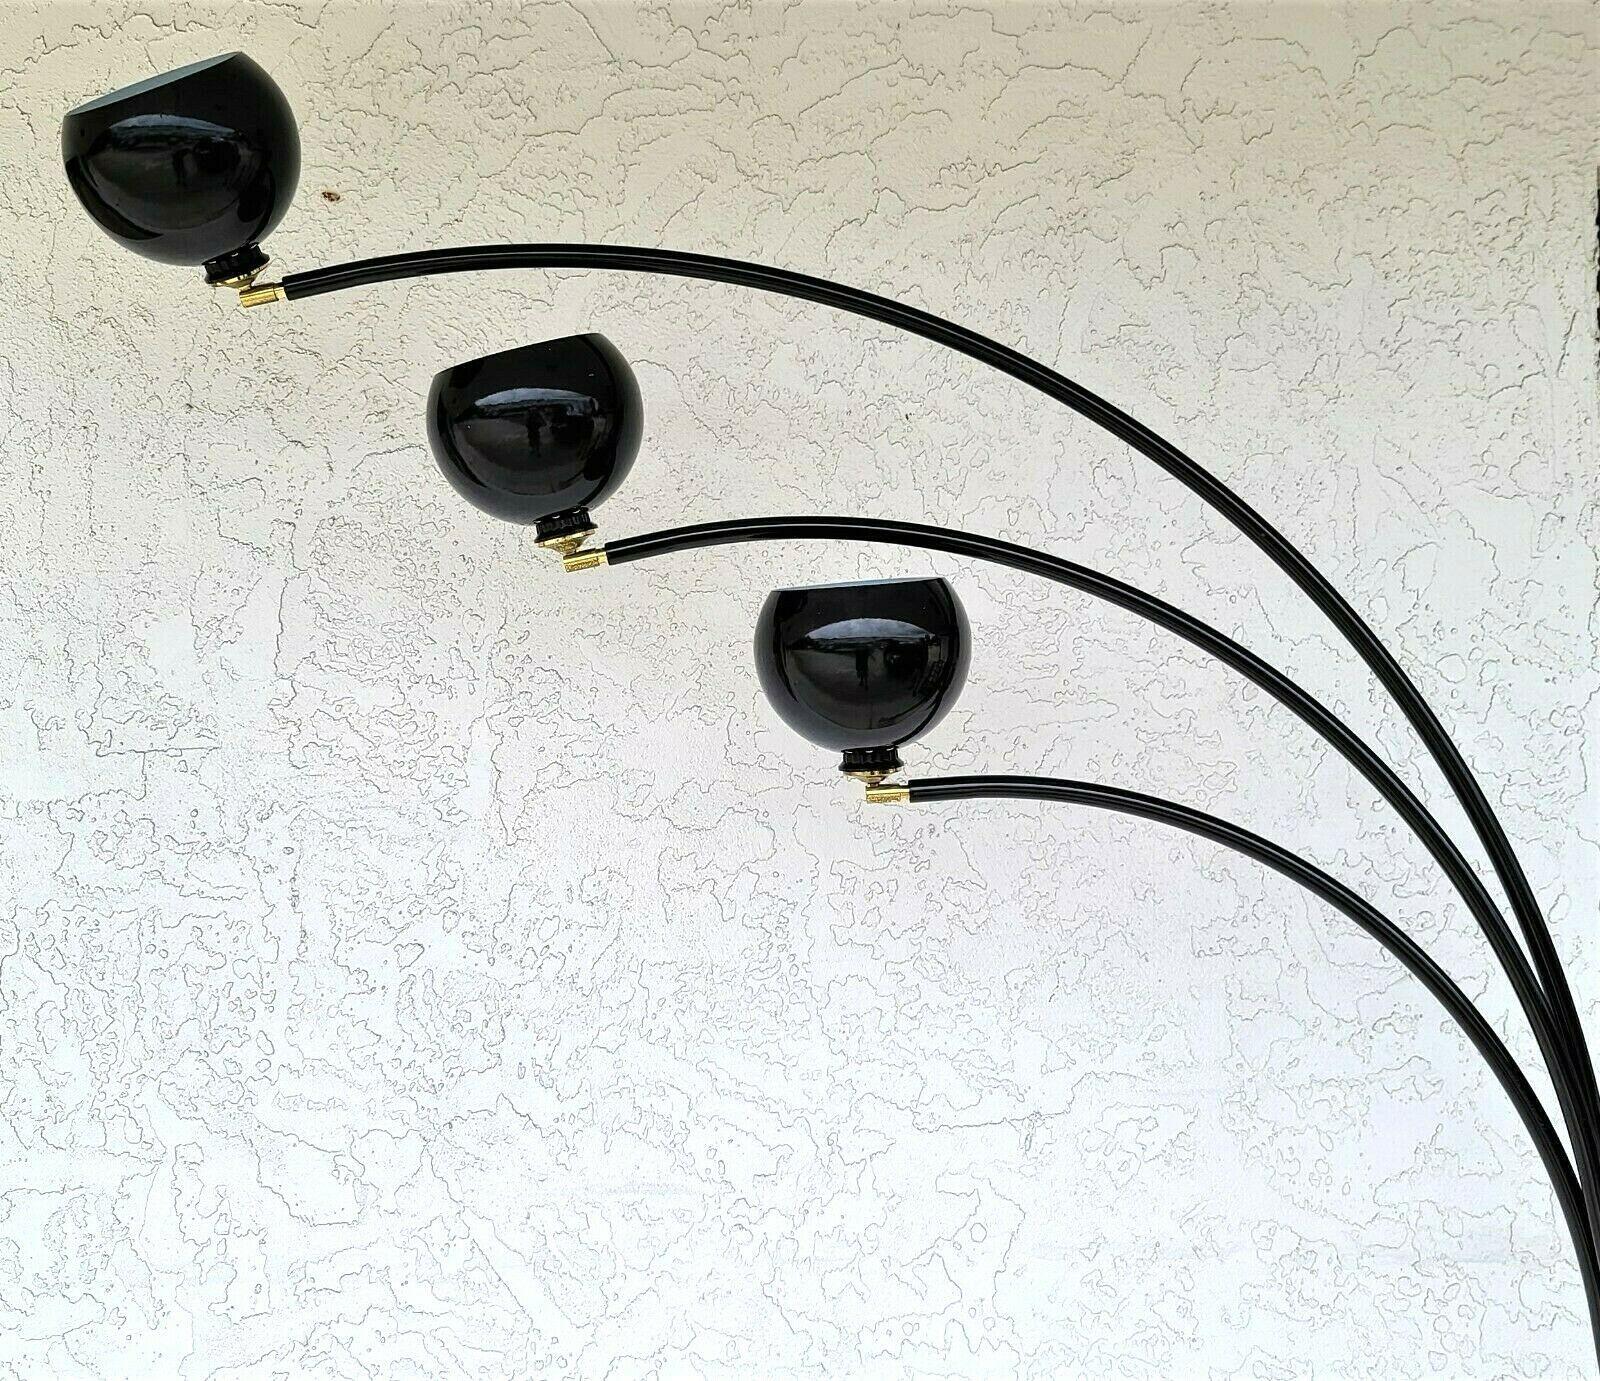 For FULL item description click on CONTINUE READING at the bottom of this page.

Offering One Of Our Recent Palm Beach Estate fine Lighting Acquisitions Of A
Mid-Century Modern Italian Black Chrome & Marble Guzzini Style Multi Directional Arc